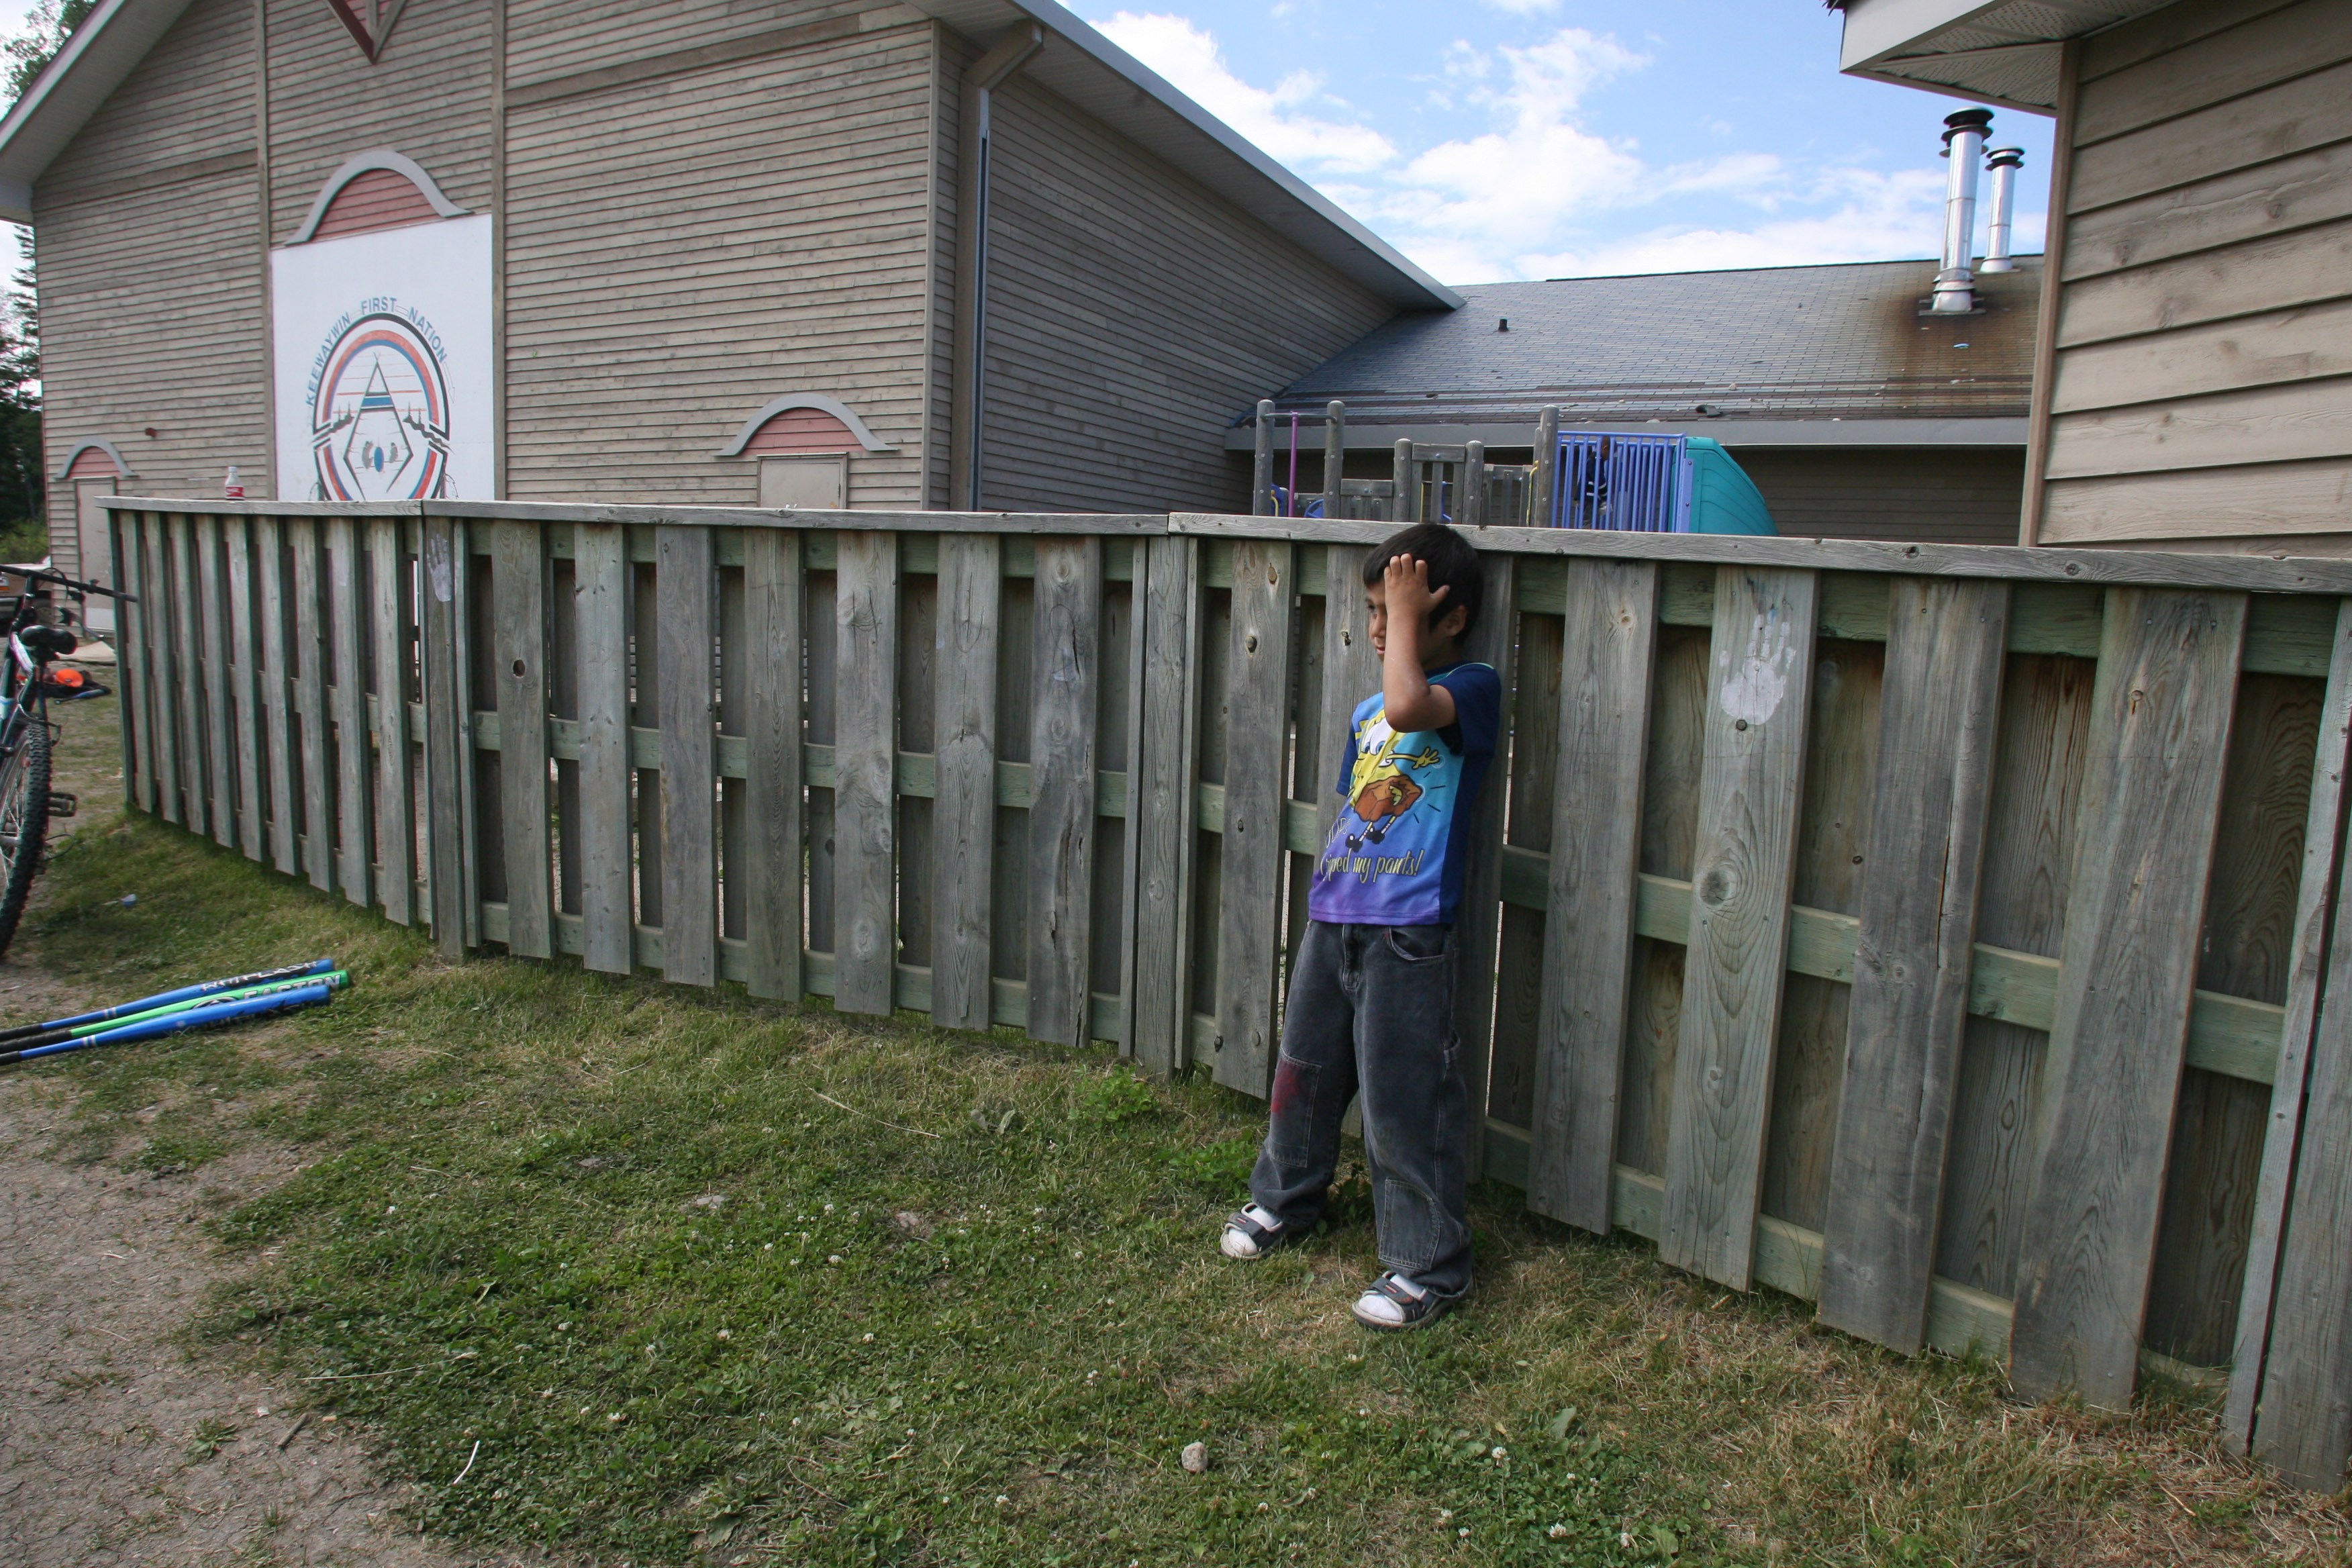 NATIONAL POST STAFF PHOTO // 072007-Toronto- Landon Kakegamic (left), 6, leans on a fence while watching a game of baseball at KeeWayWin, a First Nations community in Northern Ontario, Thursday July 20, 2006. Bartleman was visiting two fly-in First National reserves, Sachigo Lake and KeeWayWin in northern Ontario, to monitor the success of summer literacy camps that he set up to promote literacy and education. STAFF PHOTO: (Tyler Anderson/National Post)